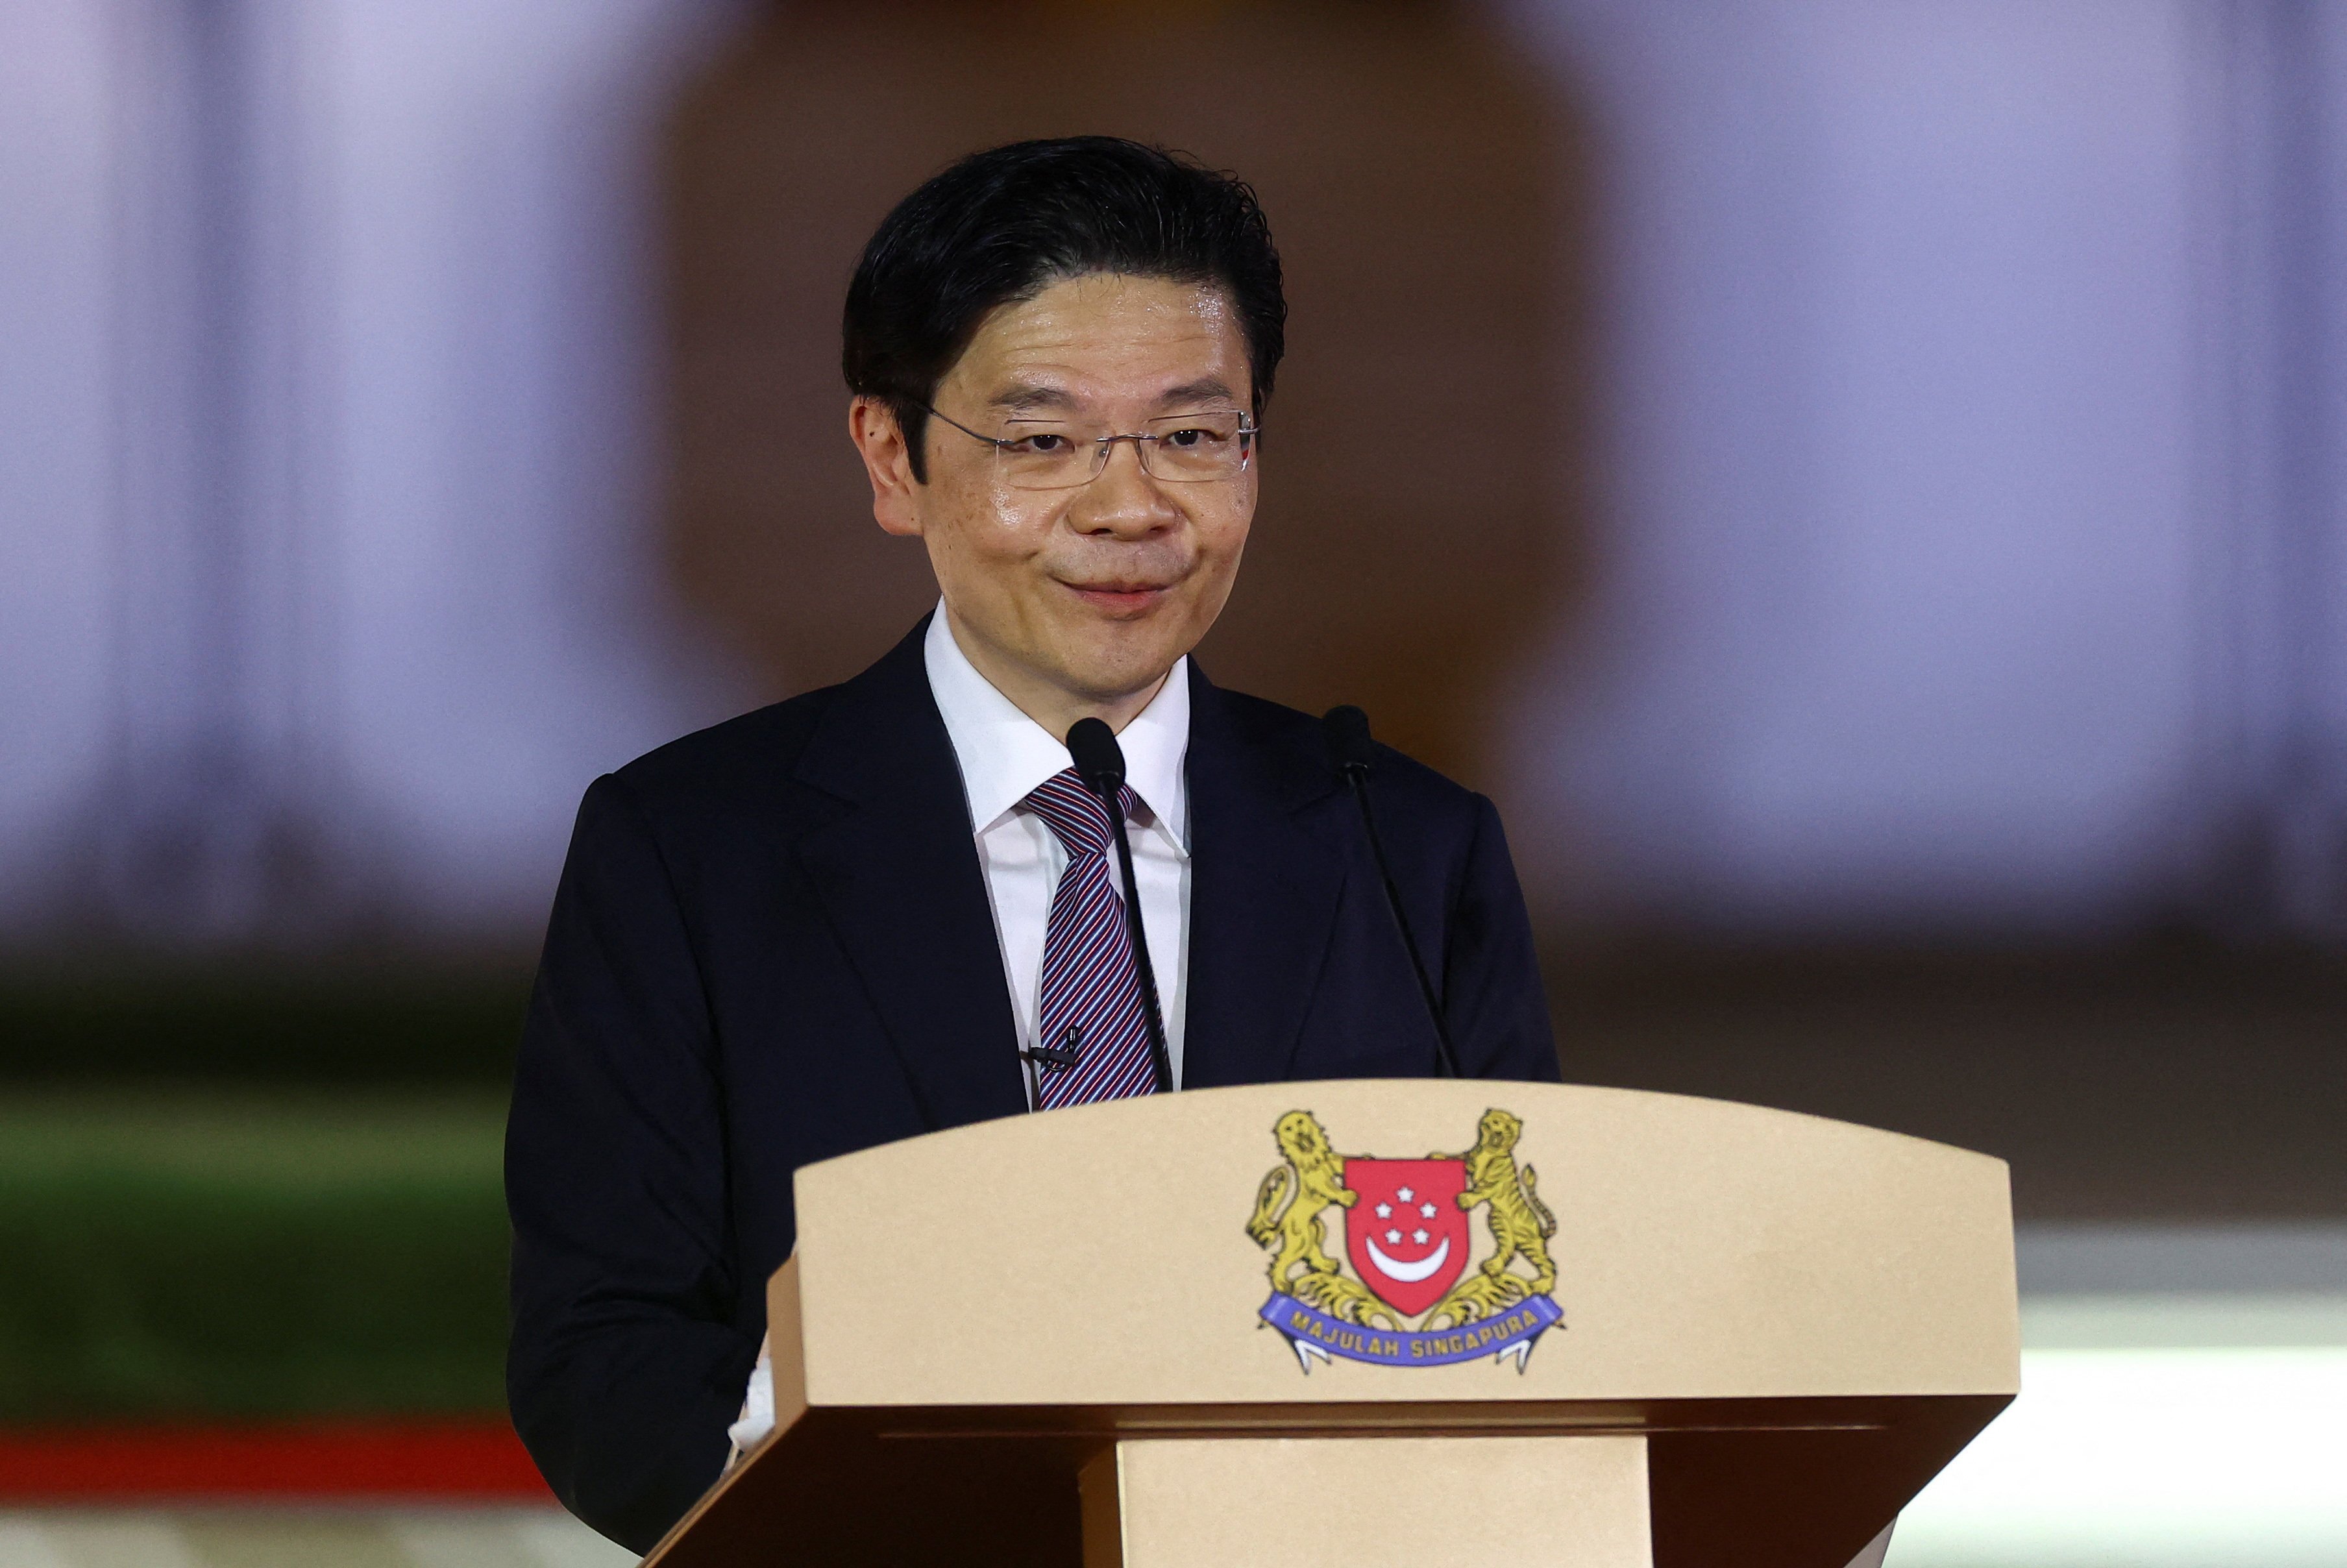 Singapore’s new Prime Minister Lawrence Wong speaks on the day he is sworn in as the country’s fourth prime minister at the Istana on Wednesday. Photo: Reuters